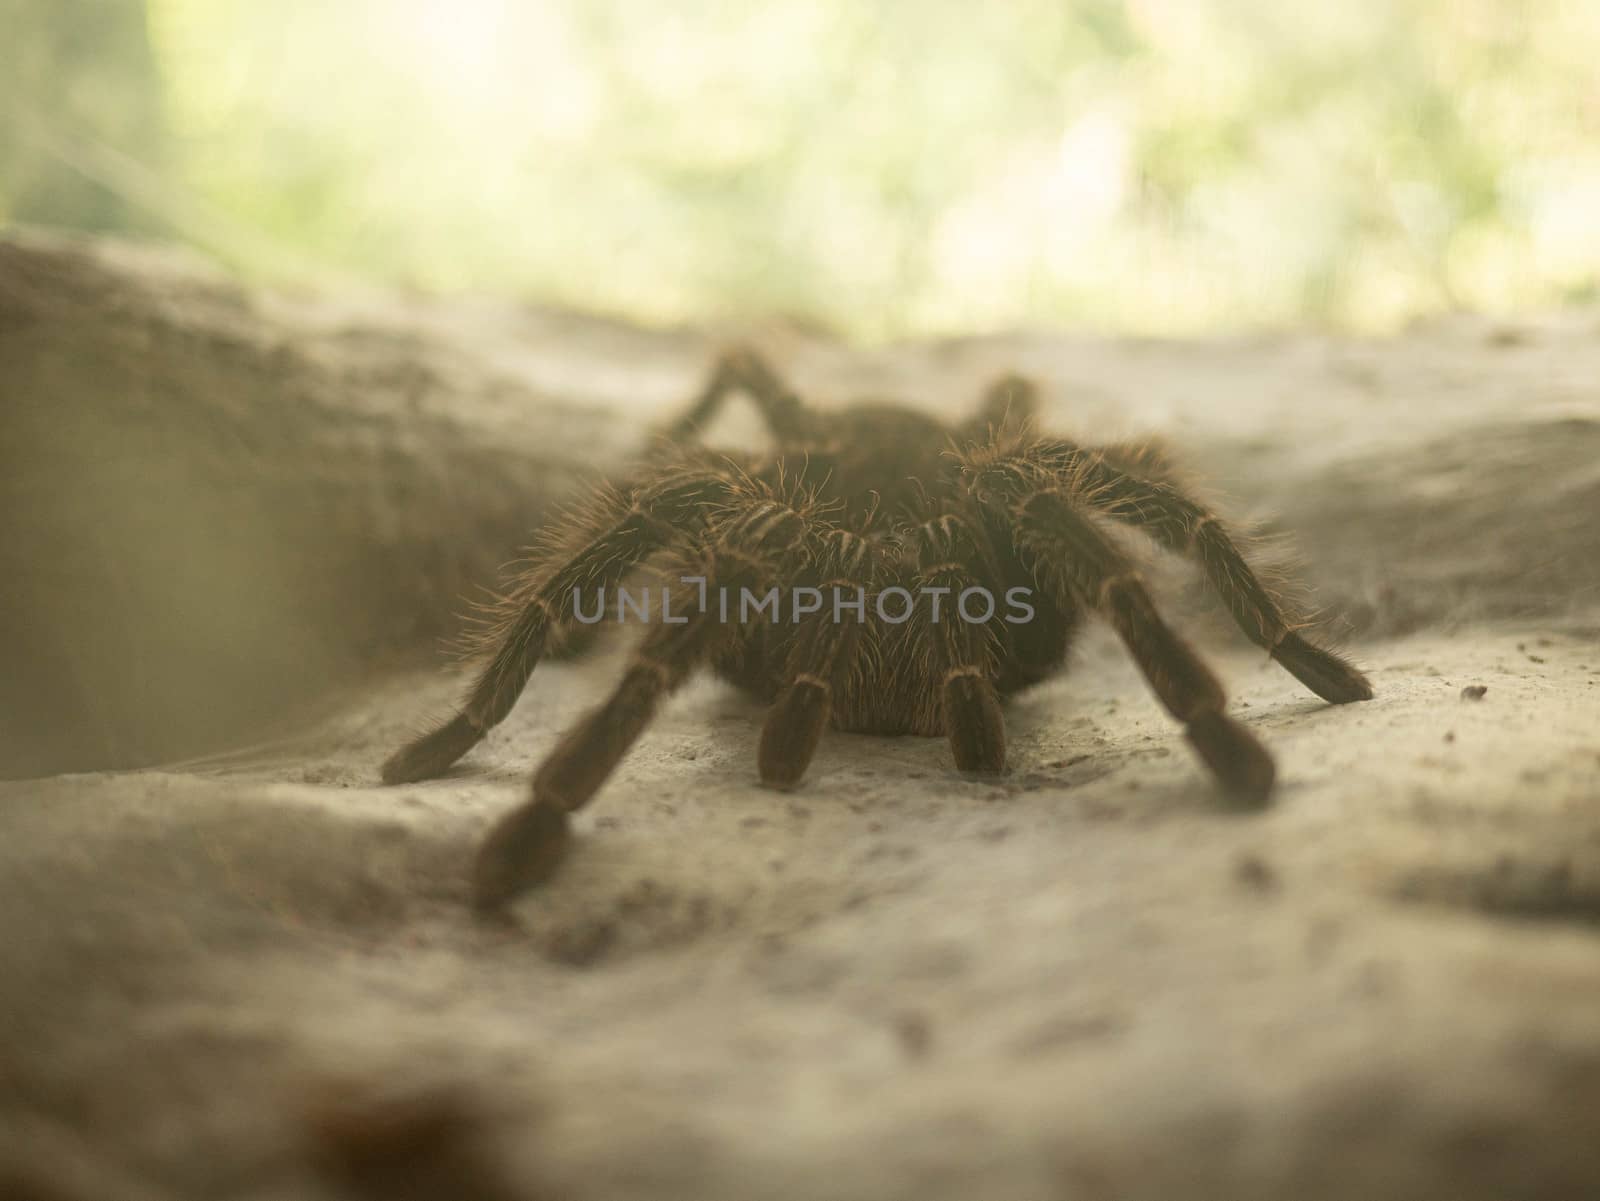 Giant Tarantula spider resting in a glass closet at the farm. by TEERASAK